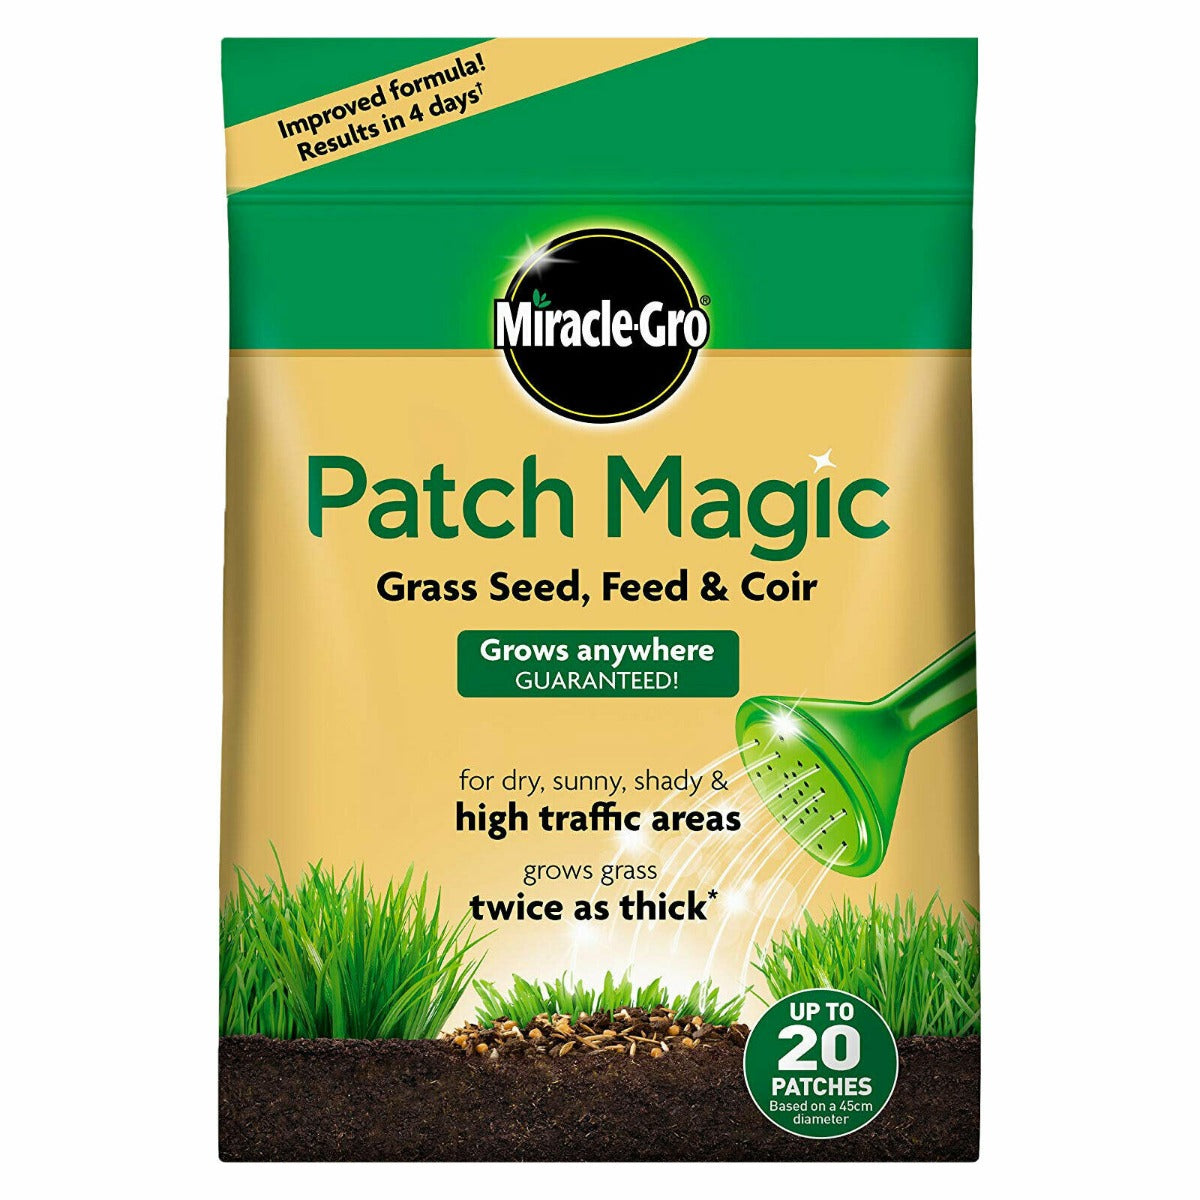 Miracle-Gro Patch Magic Grass Seed, Feed & Coir Refill 1.5kg